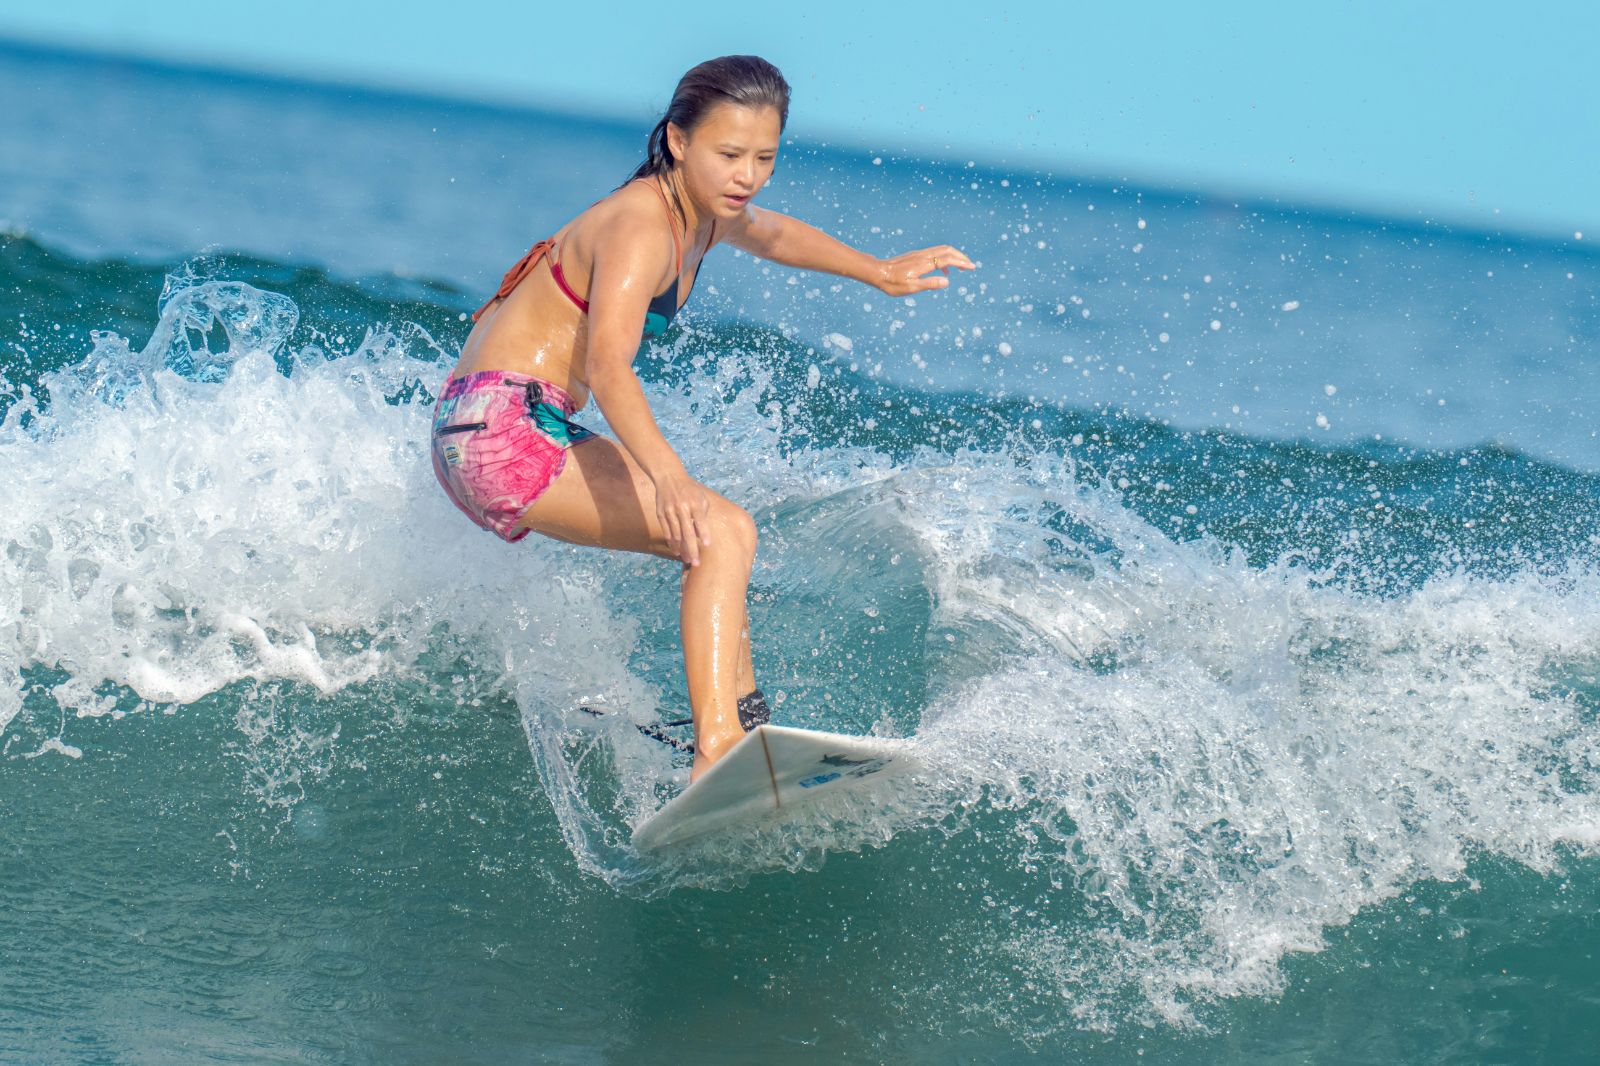 A child learning to surf